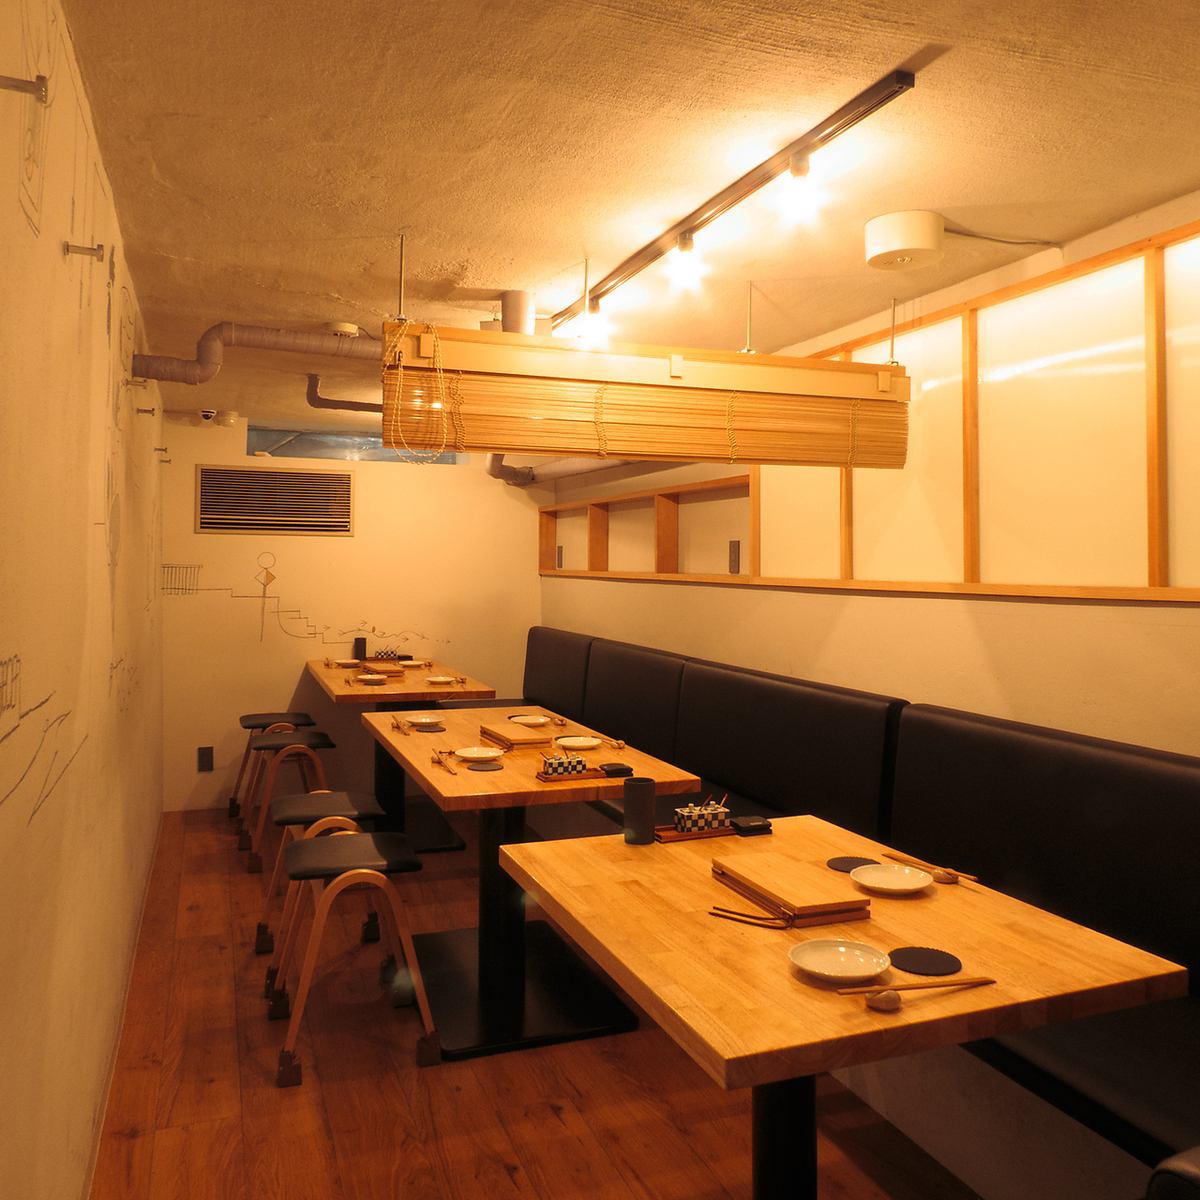 We have private rooms that can accommodate 2 to 12 people♪ Enjoy your time in a relaxed manner.